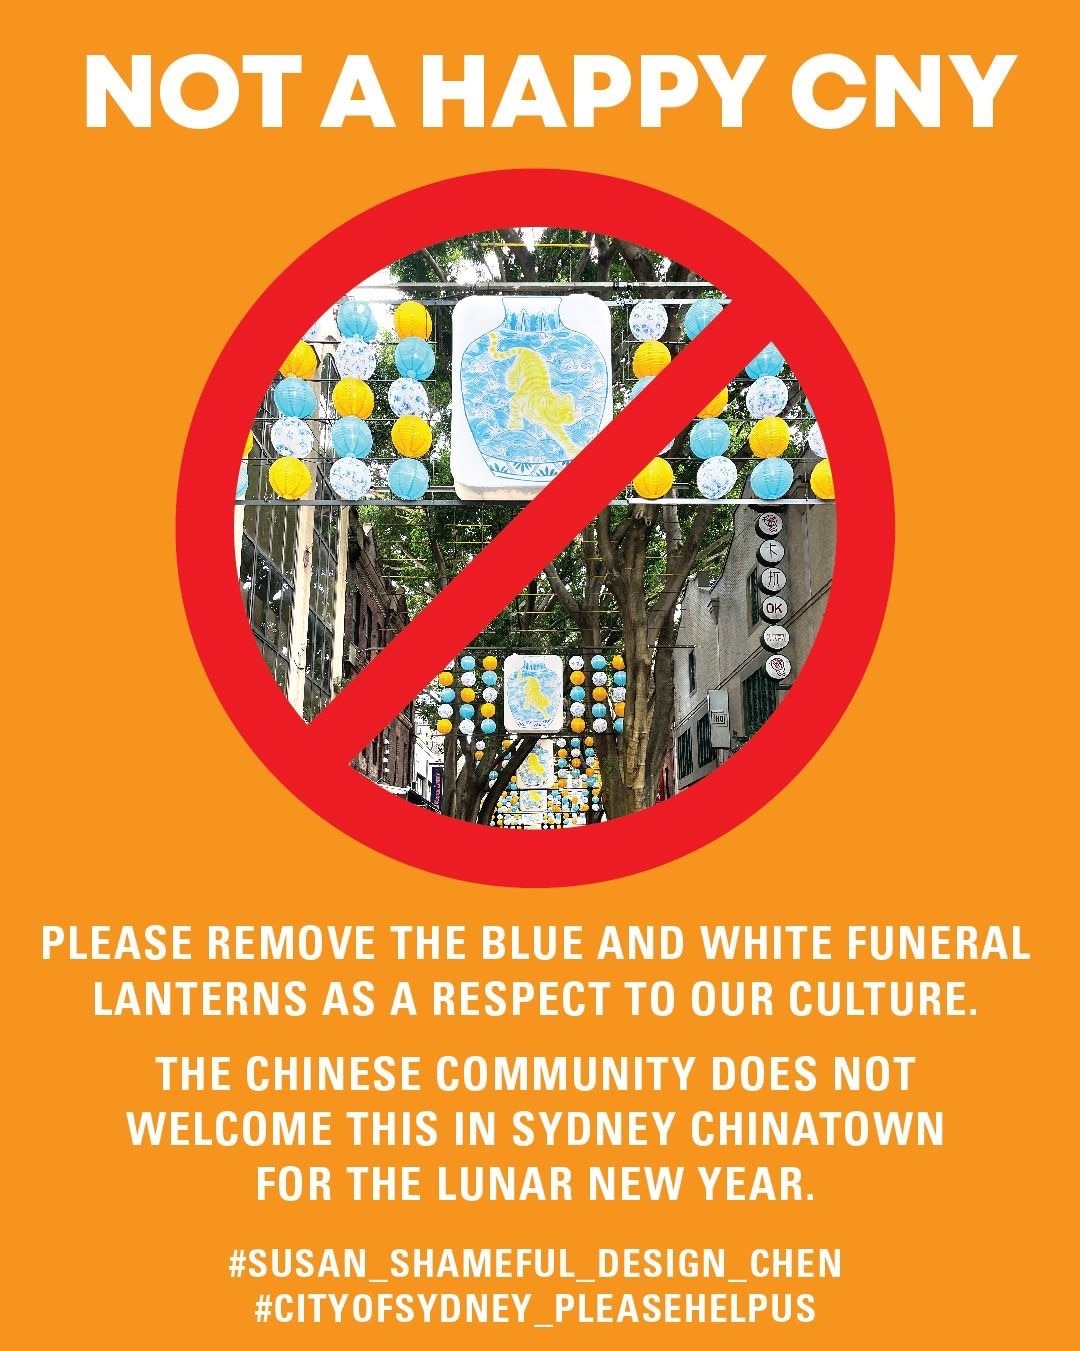 Sydney Chinatown Focus Group not happy with the colours used in Chen's art installation to mark Lunar New Year. 